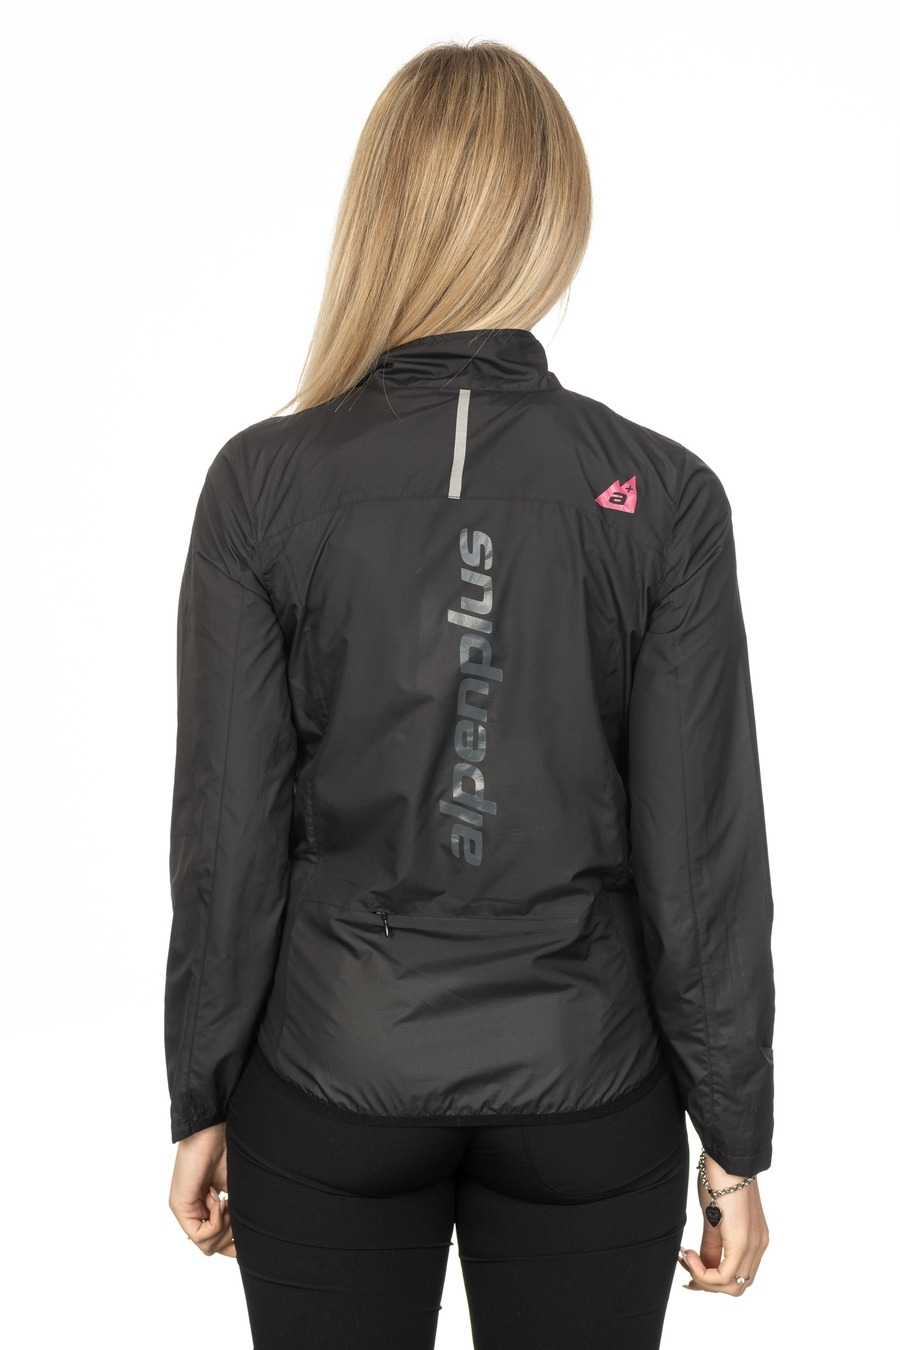 Woman Running Softshell Jacket, Water-repellent Breathable, and Windproof